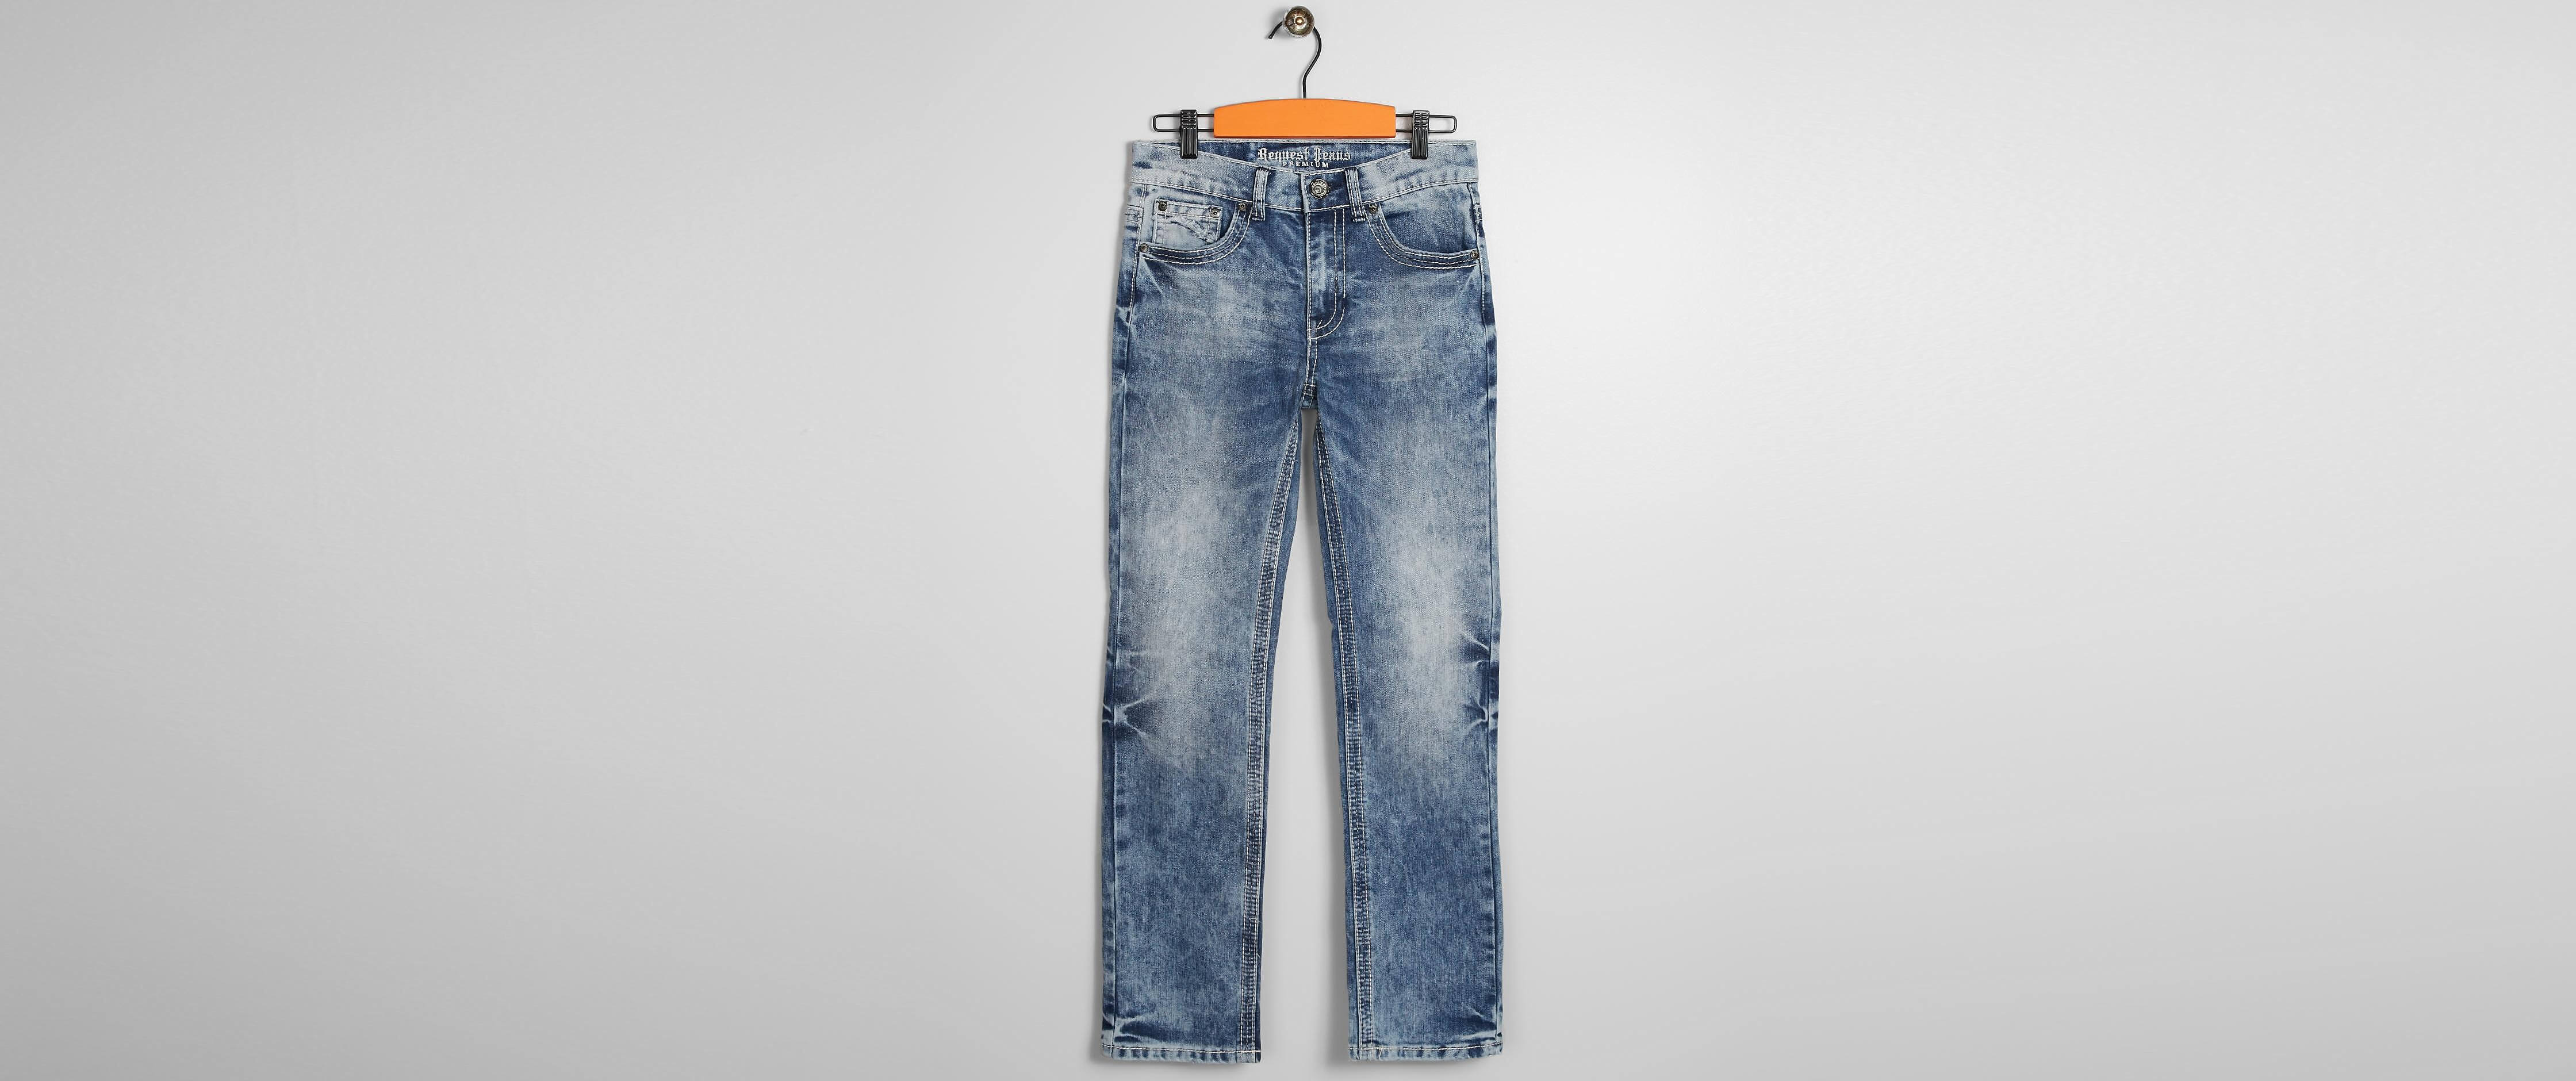 boys request jeans